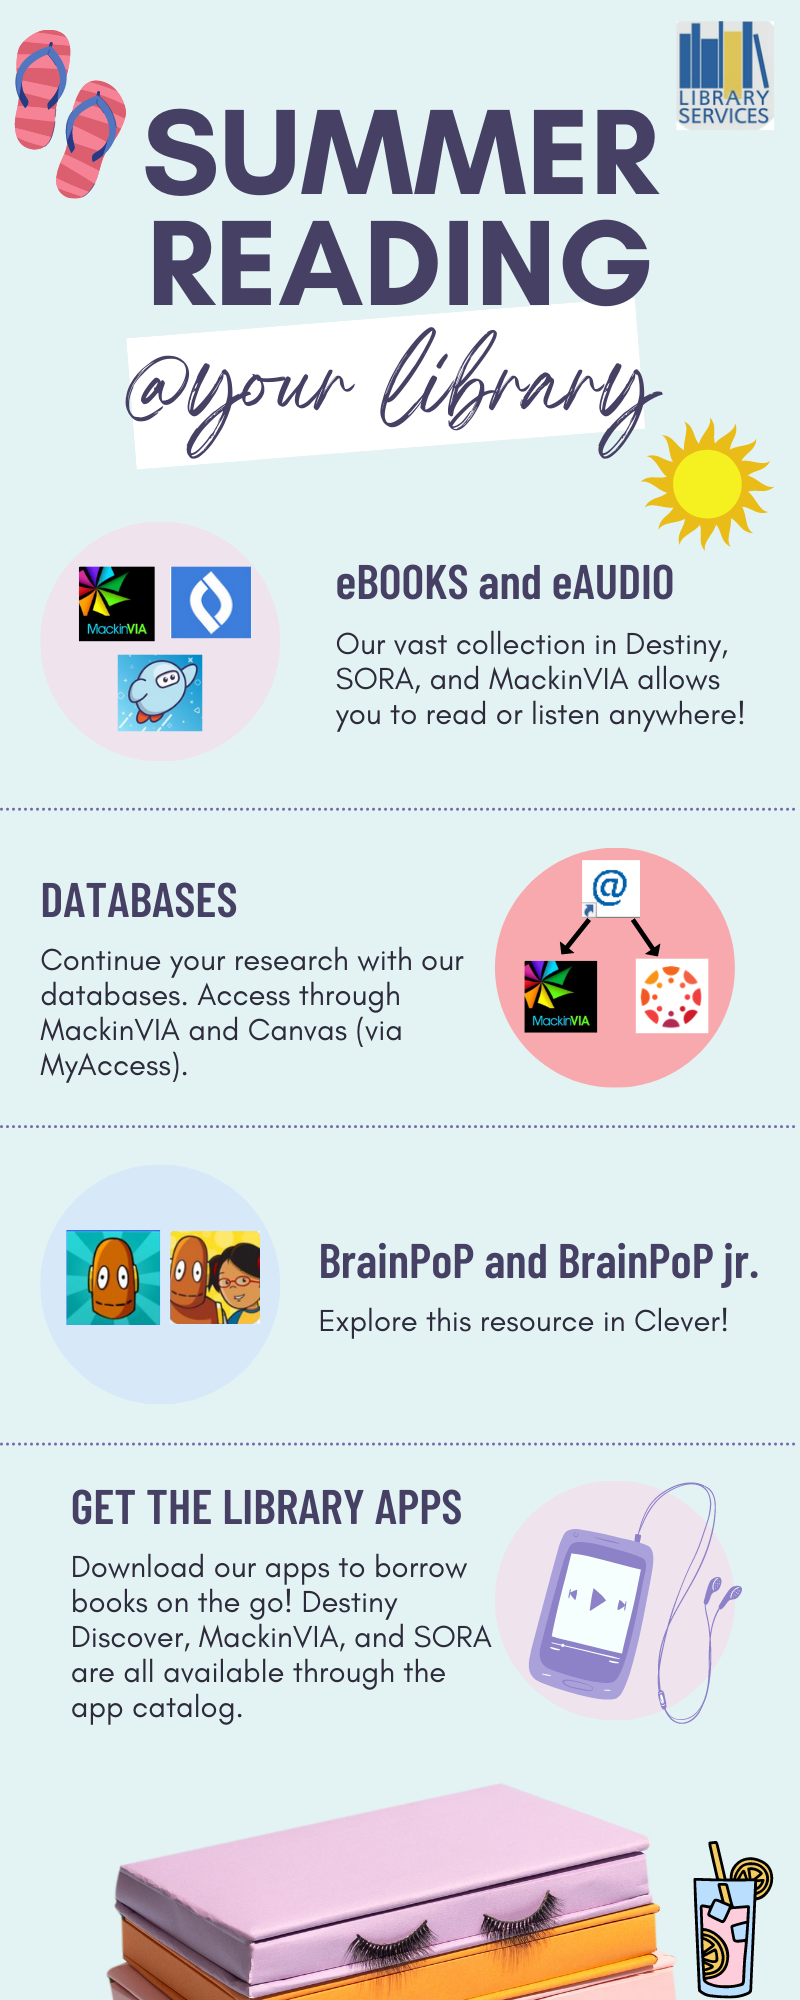 Bright Summer Reading Tips Infographic